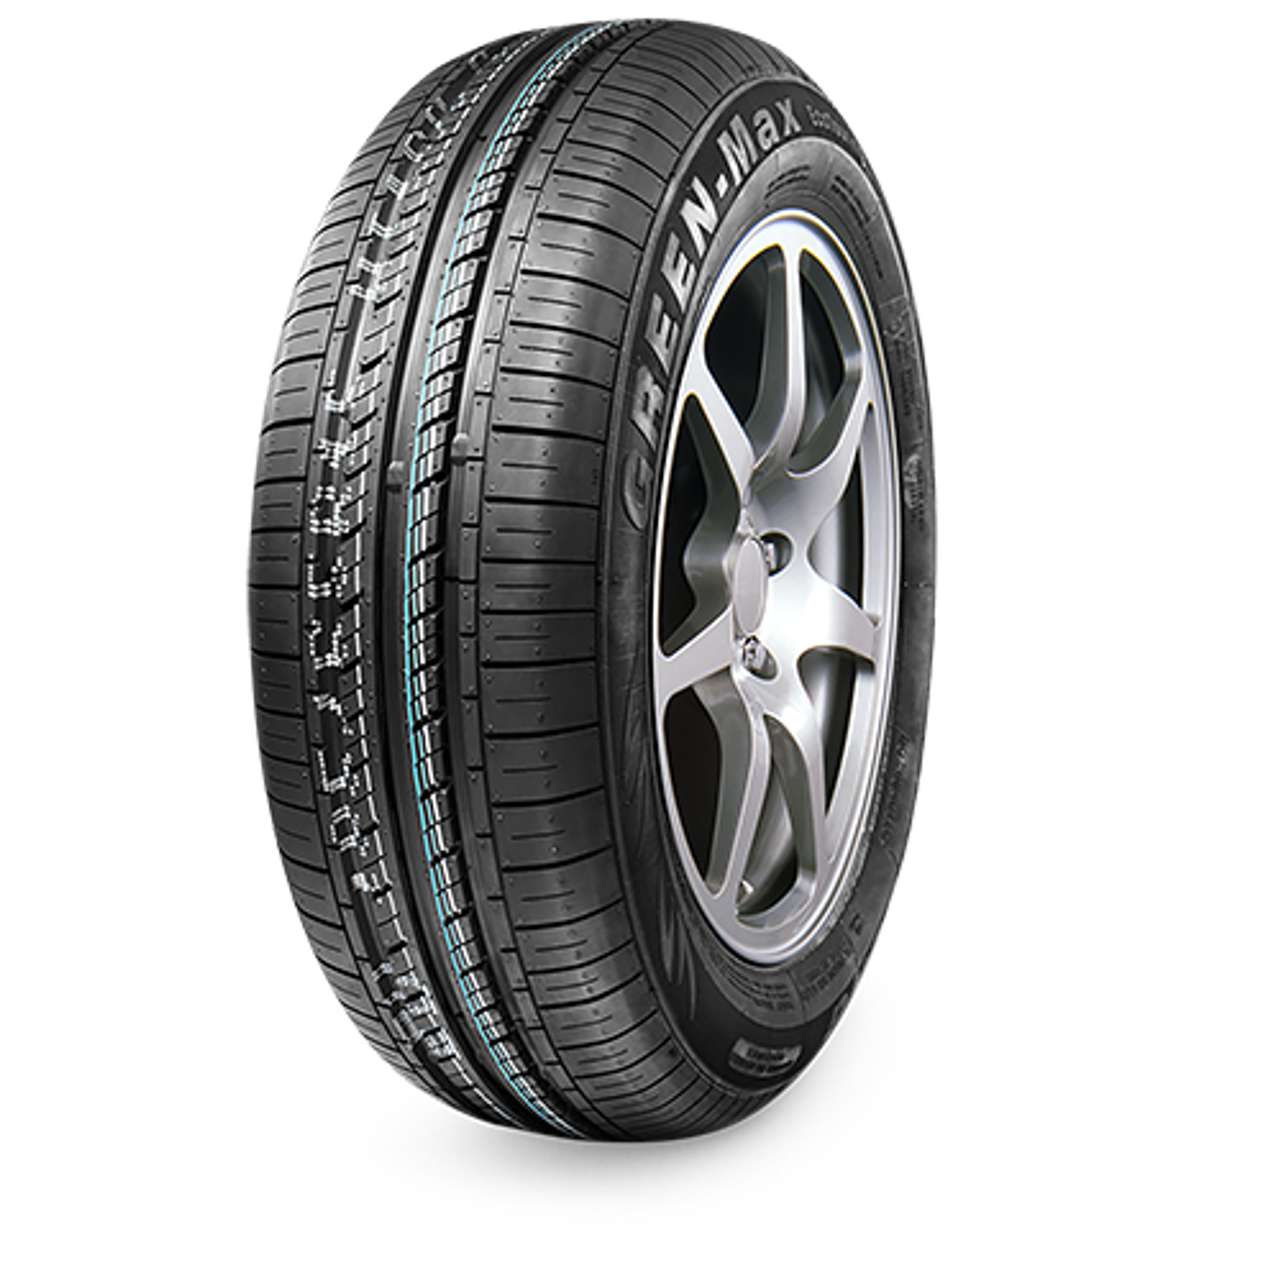 LINGLONG GREEN-MAX ECOTOURING 185/65R15 92T BSW XL